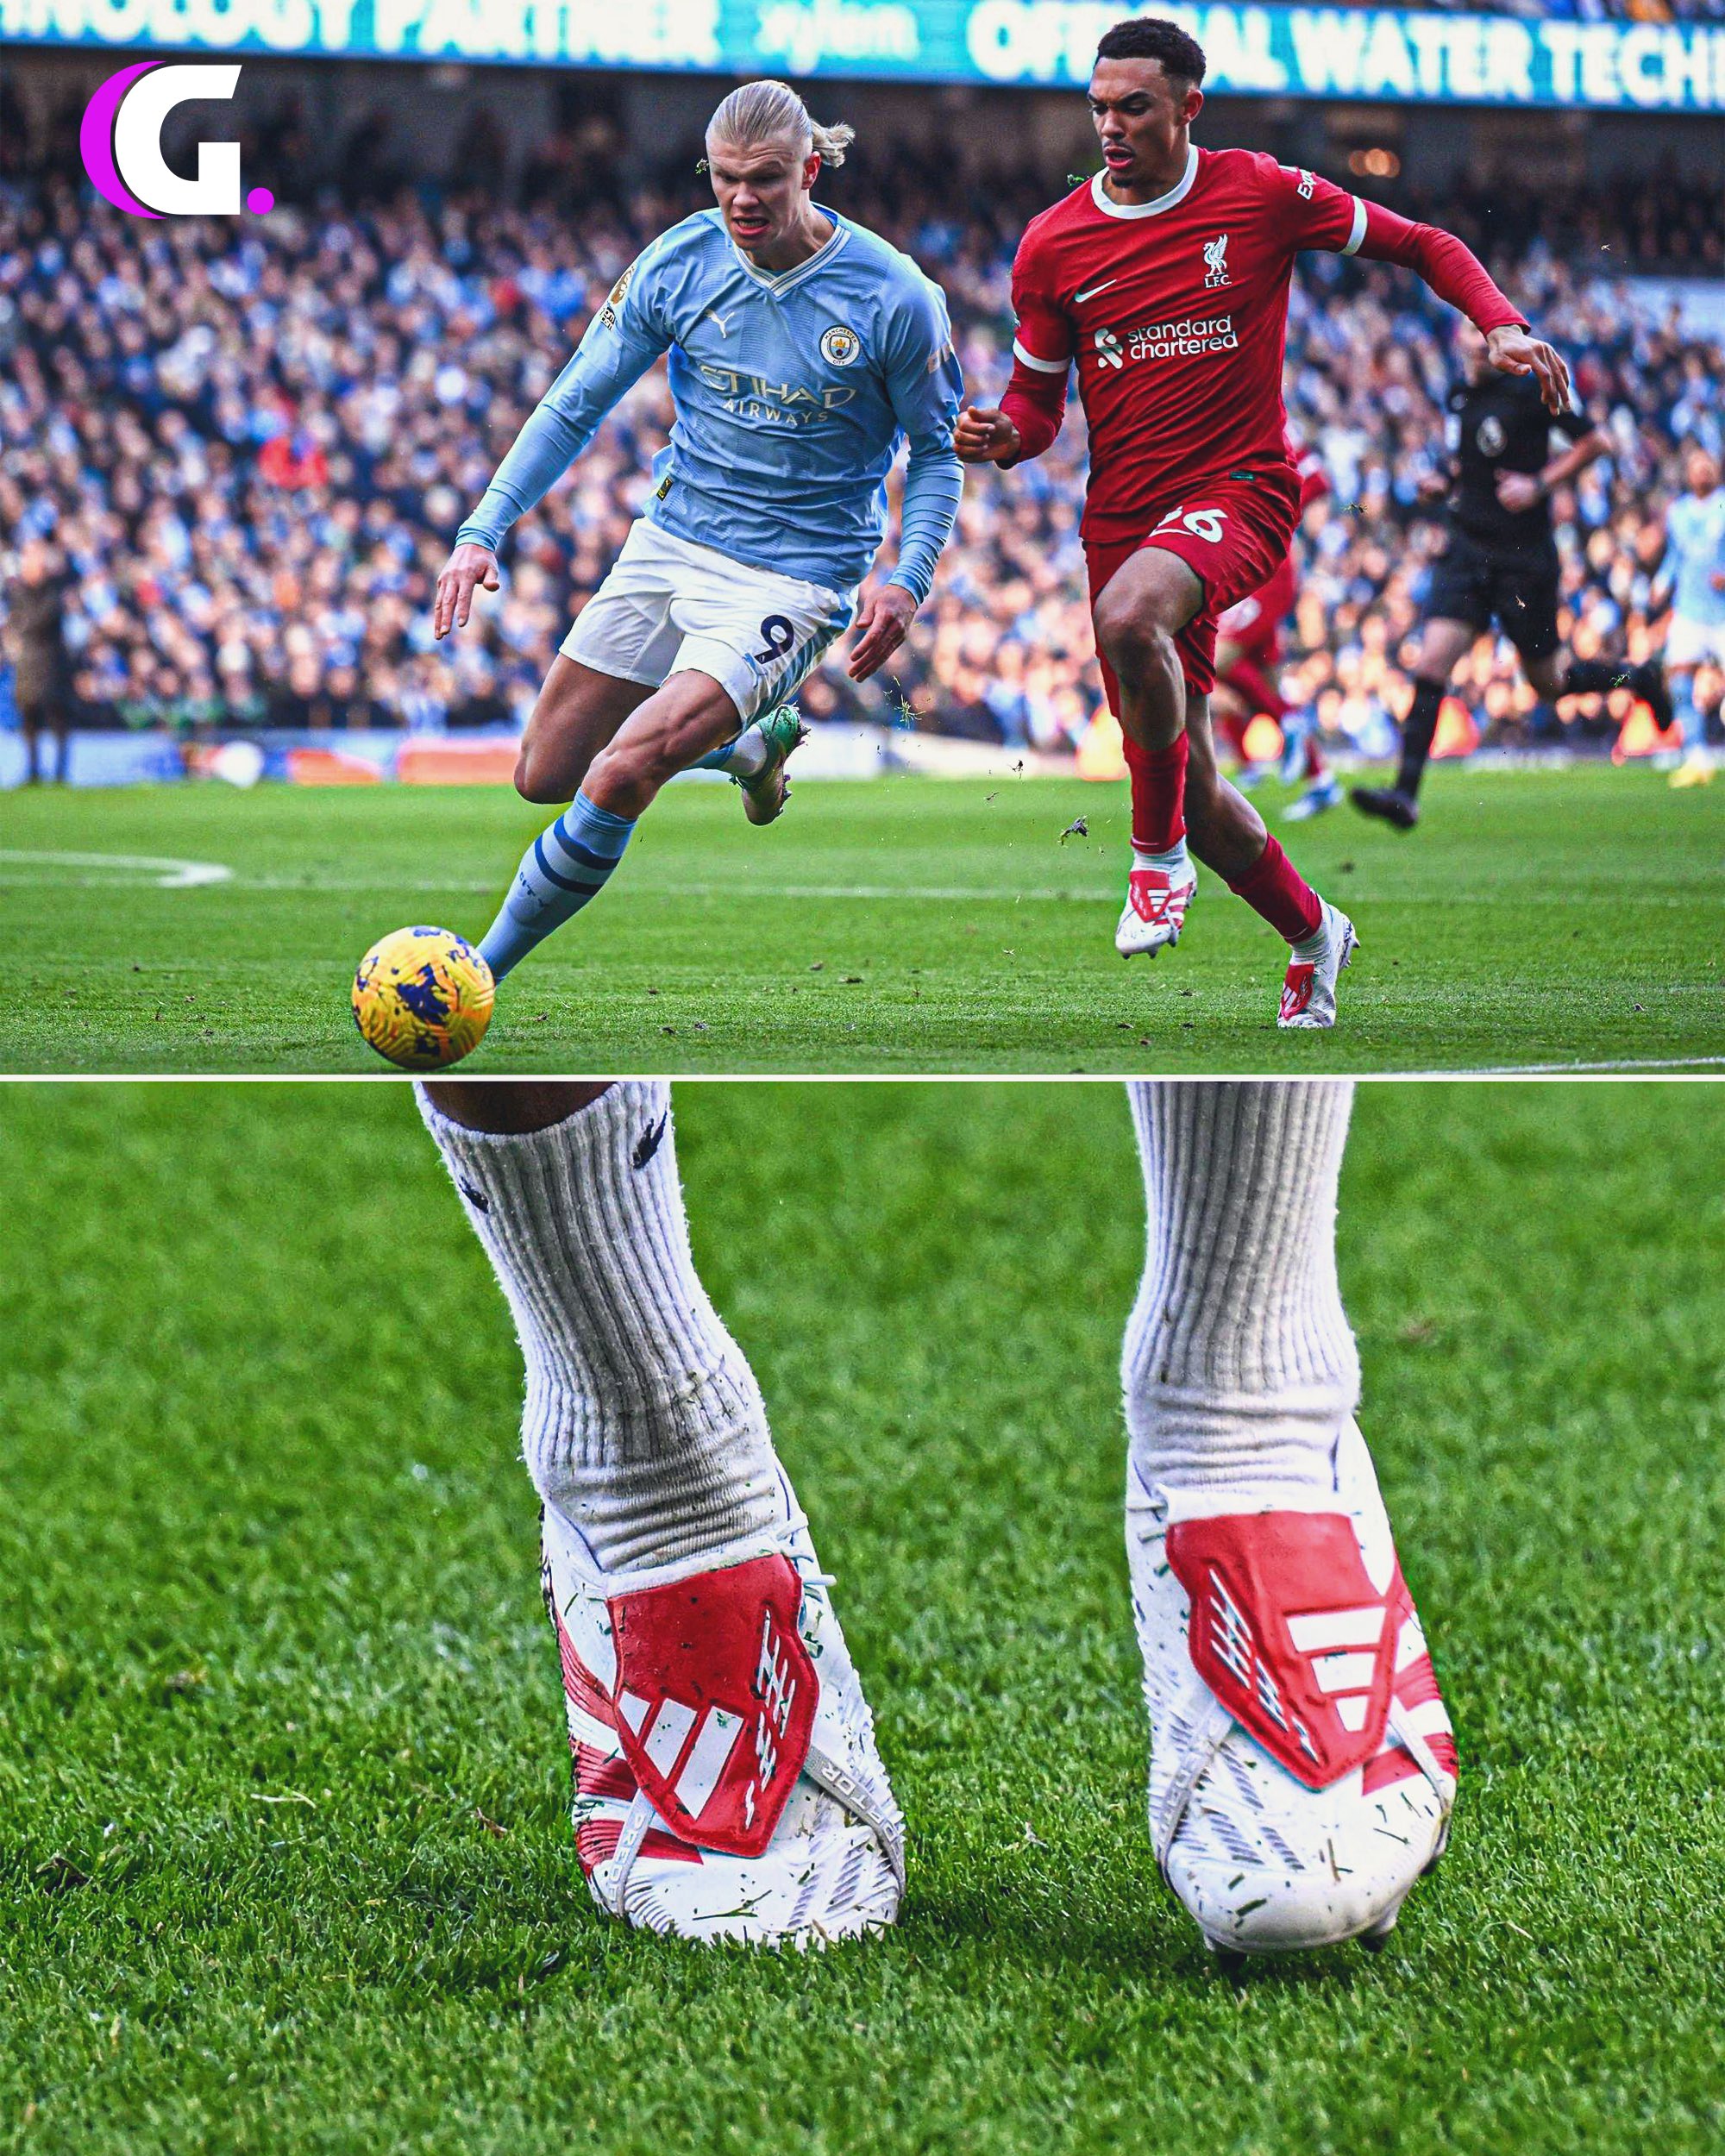 CentreGoals. on X: "Trent Alexander-Arnold is rocking a pair of unrealised Adidas predators. https://t.co/9Amtymqpnw" / X